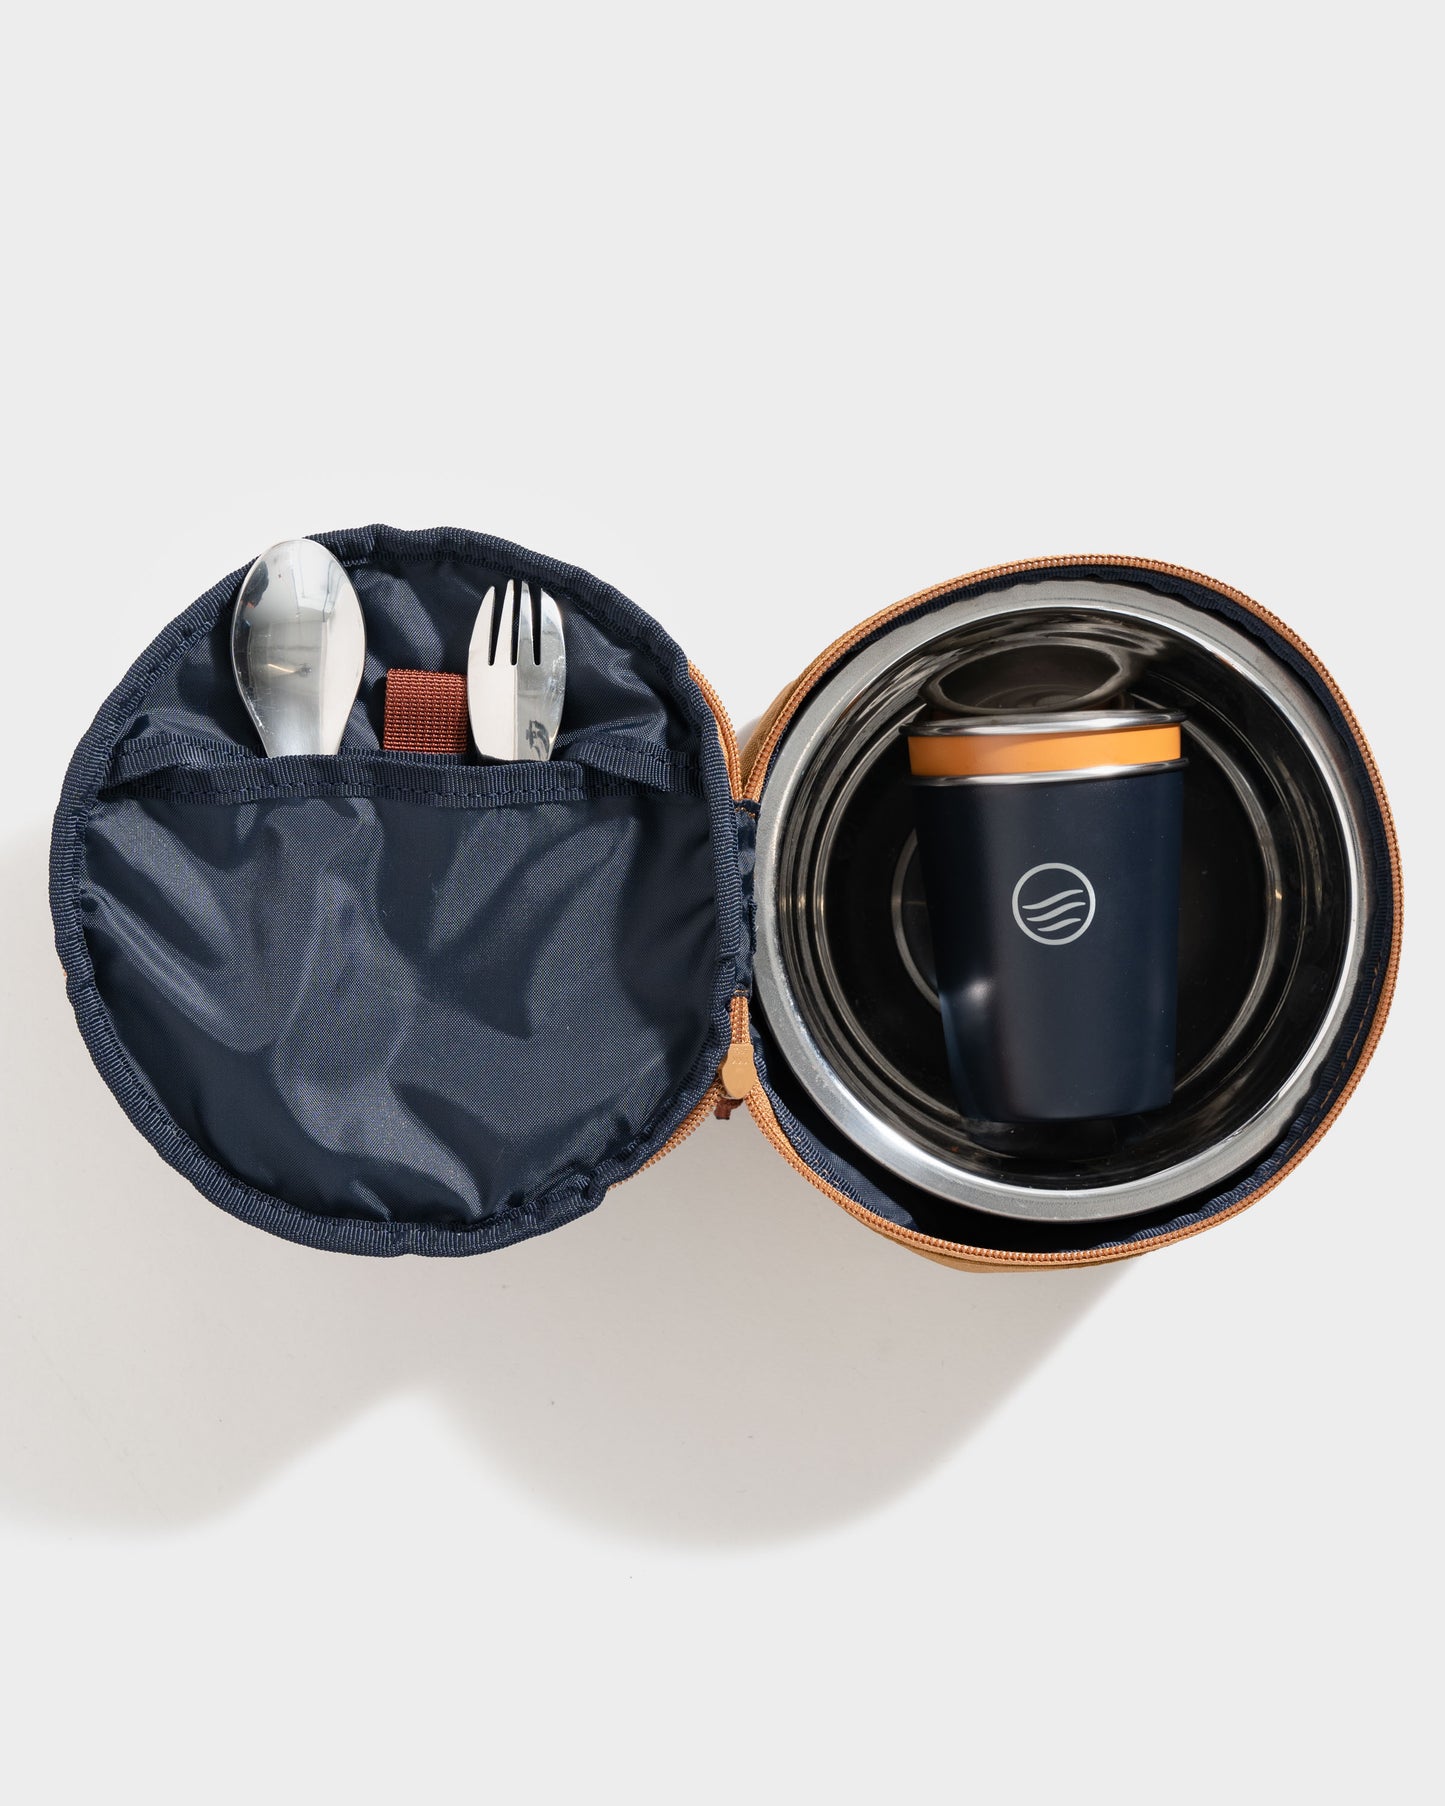 United by Blue Reusable Meal Camping Kit